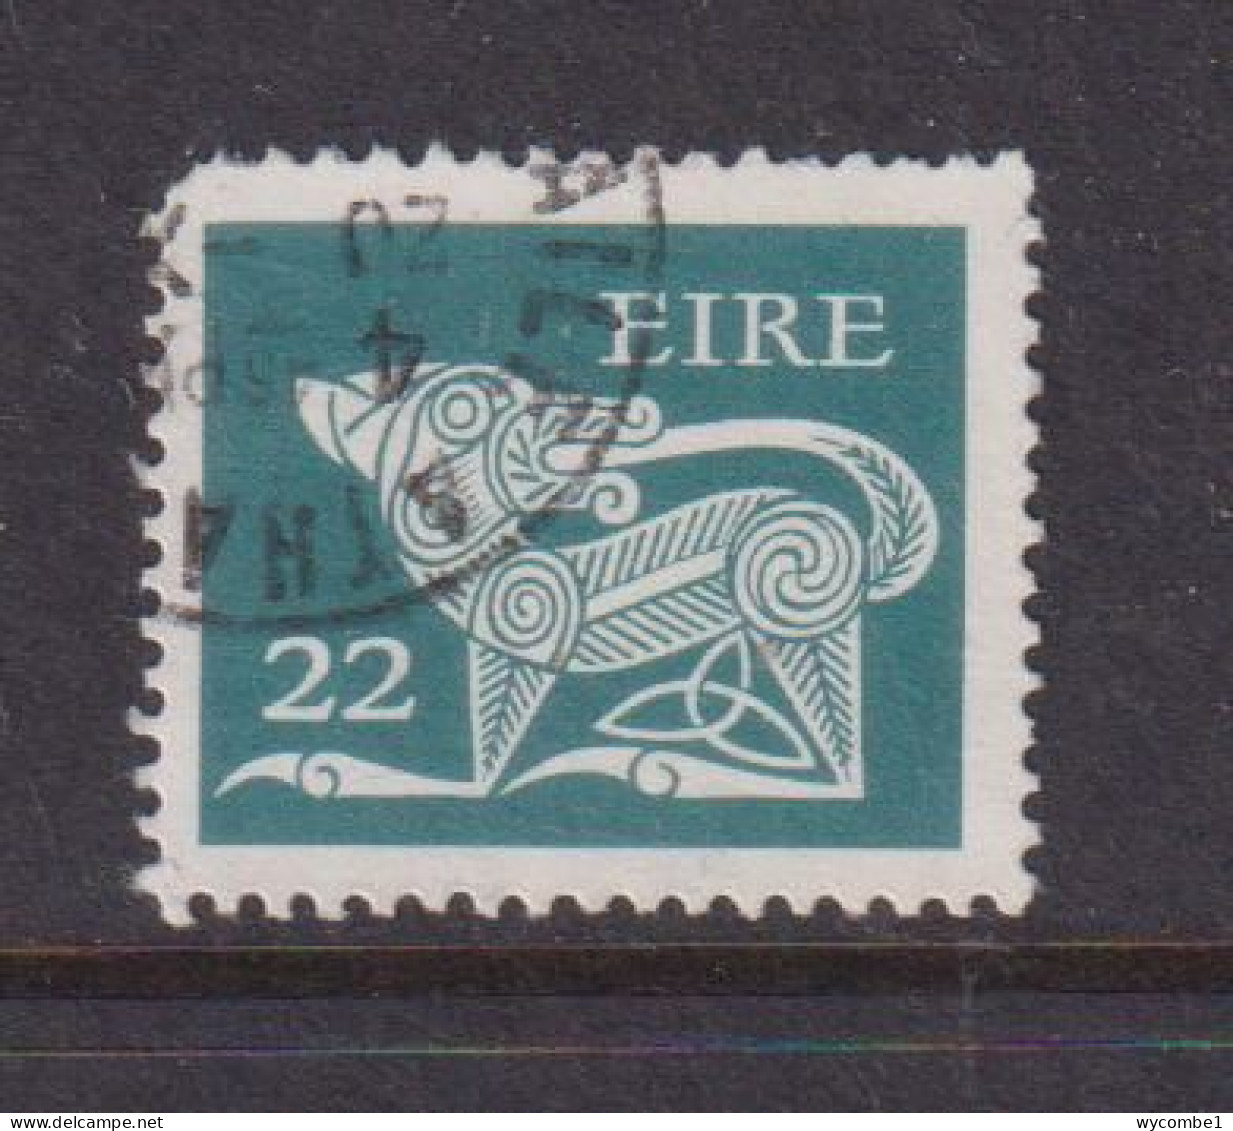 IRELAND - 1971  Decimal Currency Definitives 22p  Used As Scan - Usati